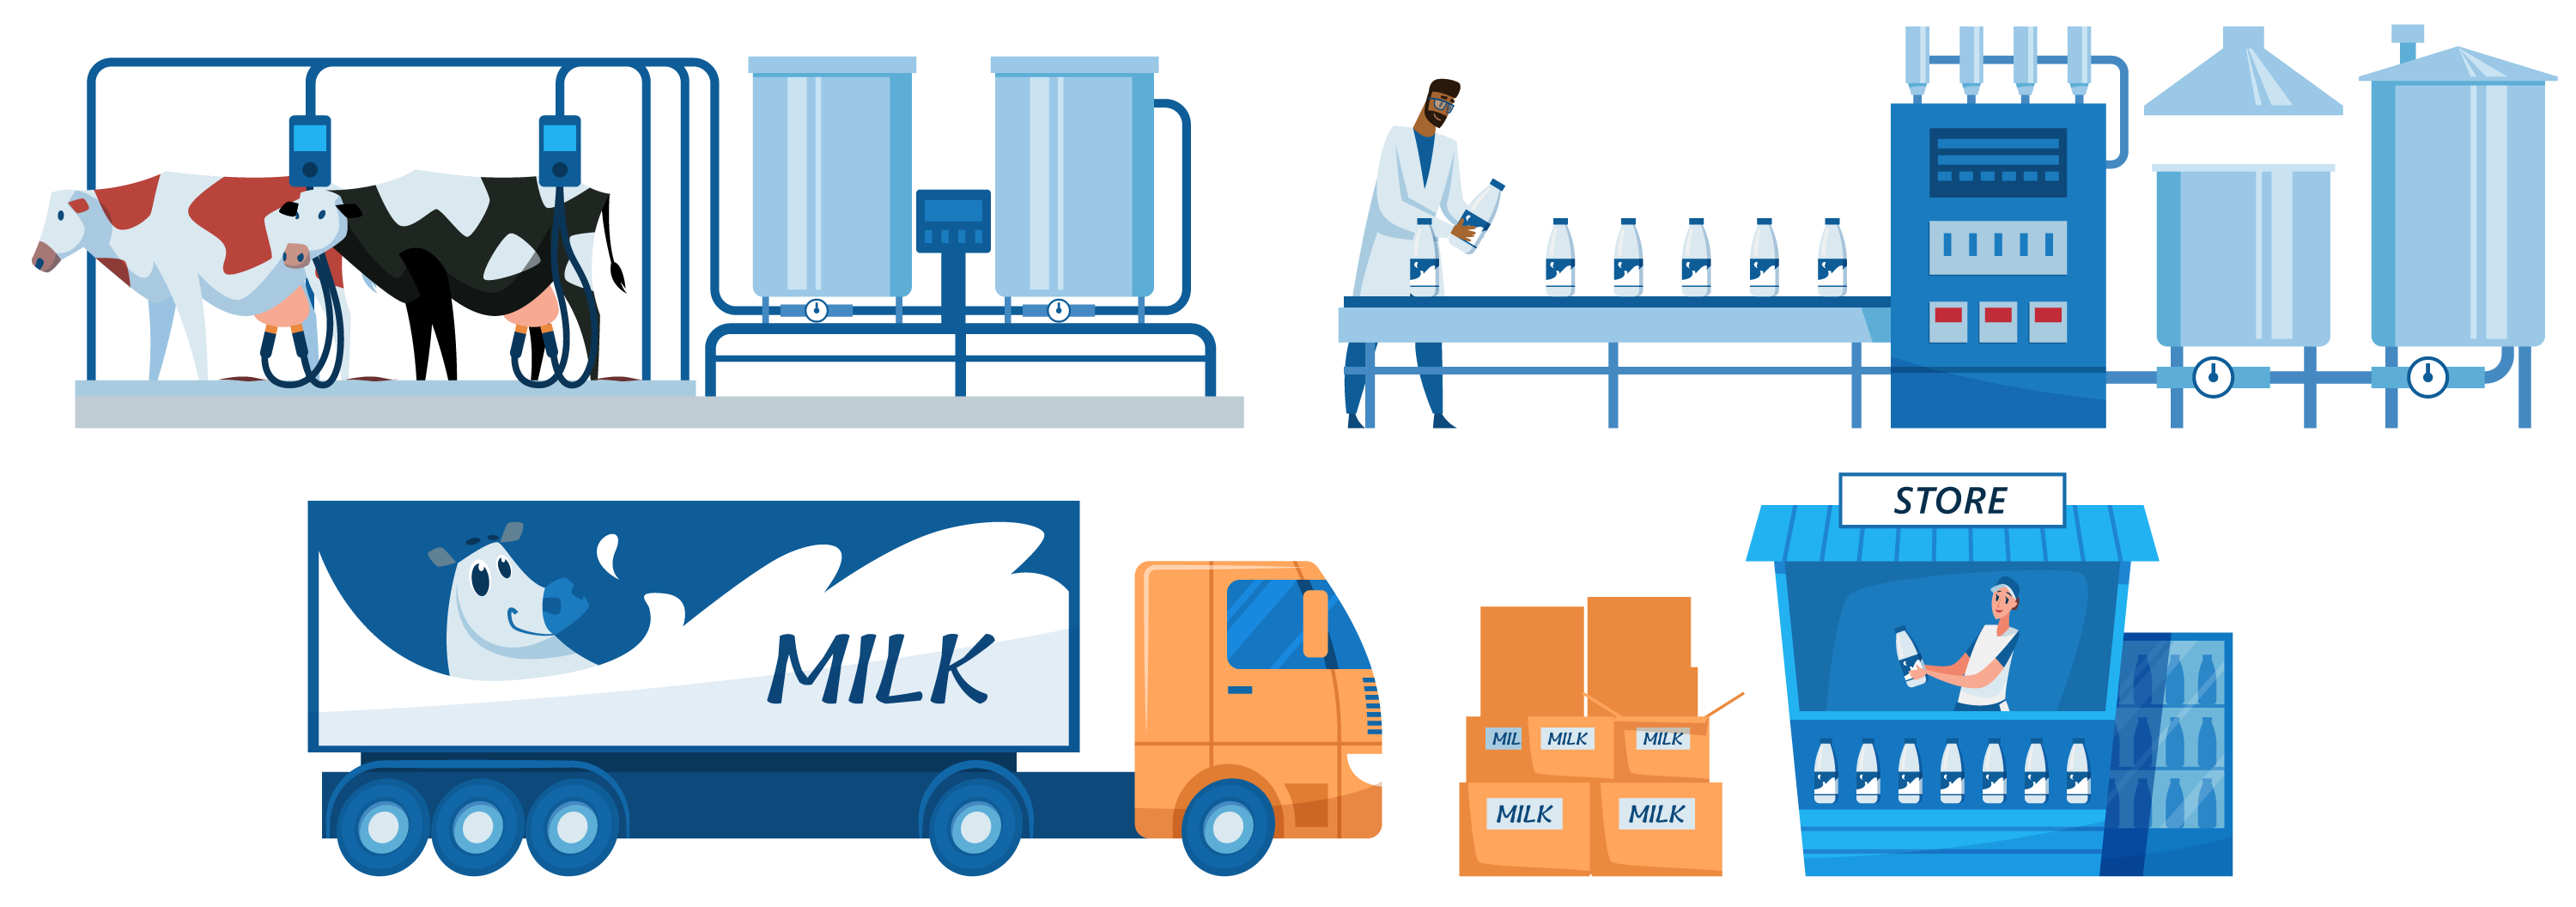 Illustration of the milk production process from milking to delivering pasteurized milk to the store